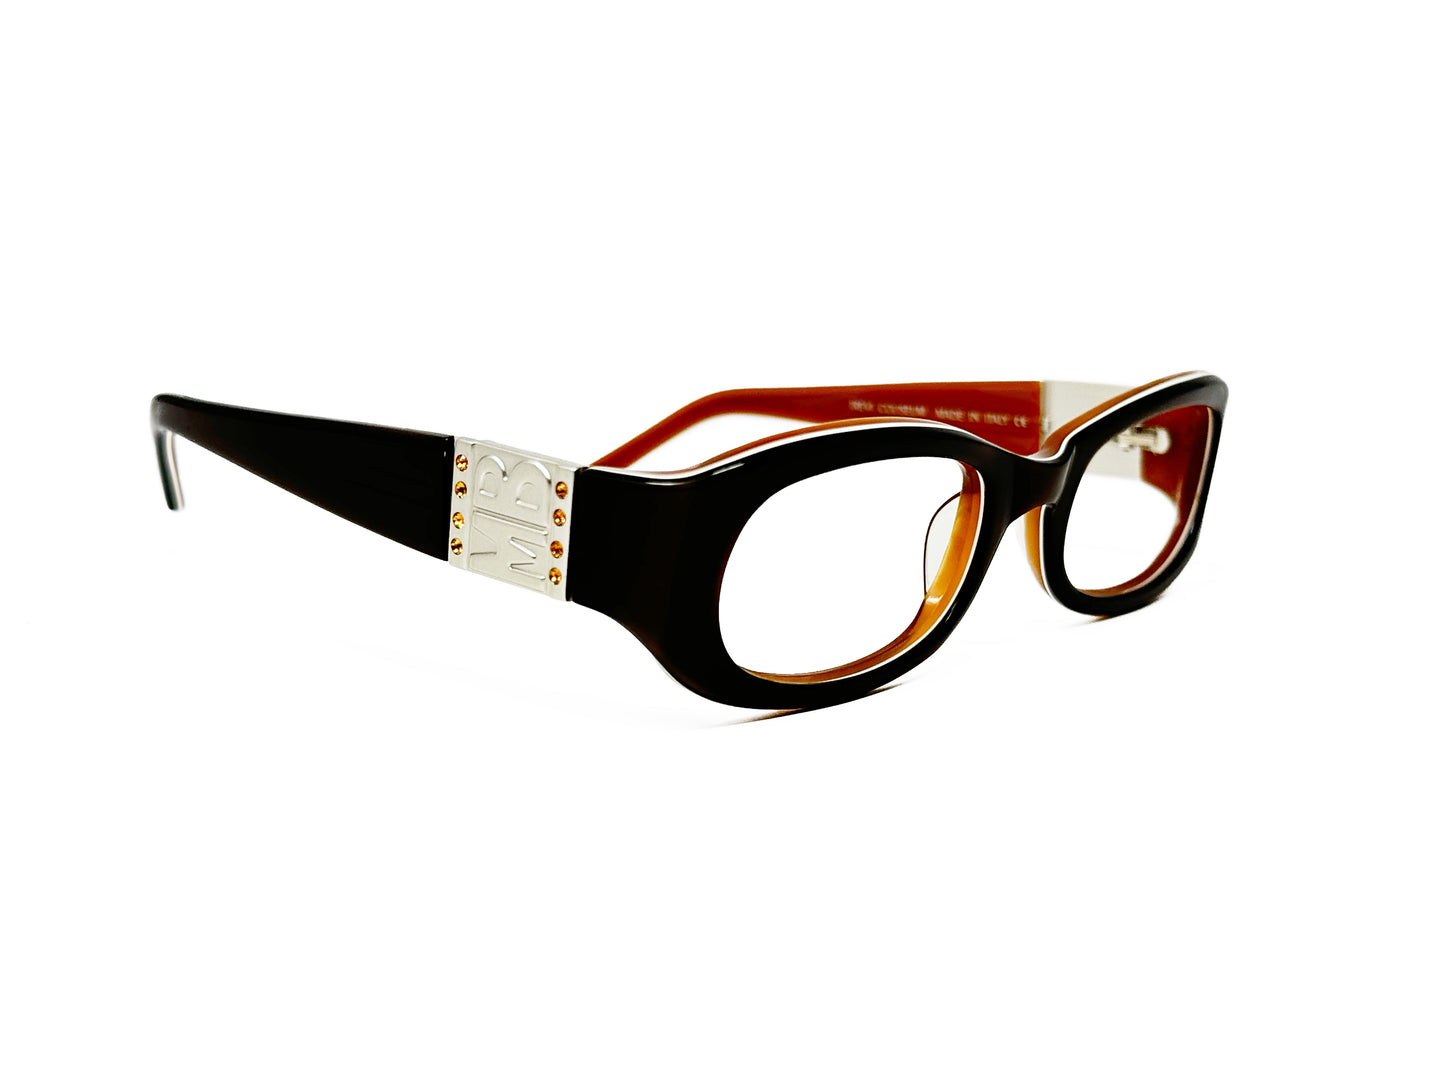 Mariella Burani curved, rectangular, acetate optical frame with oval shaped lenses. Model: 2000-17. Color: 3 - Brown - with silver metal logo on side. Side view.